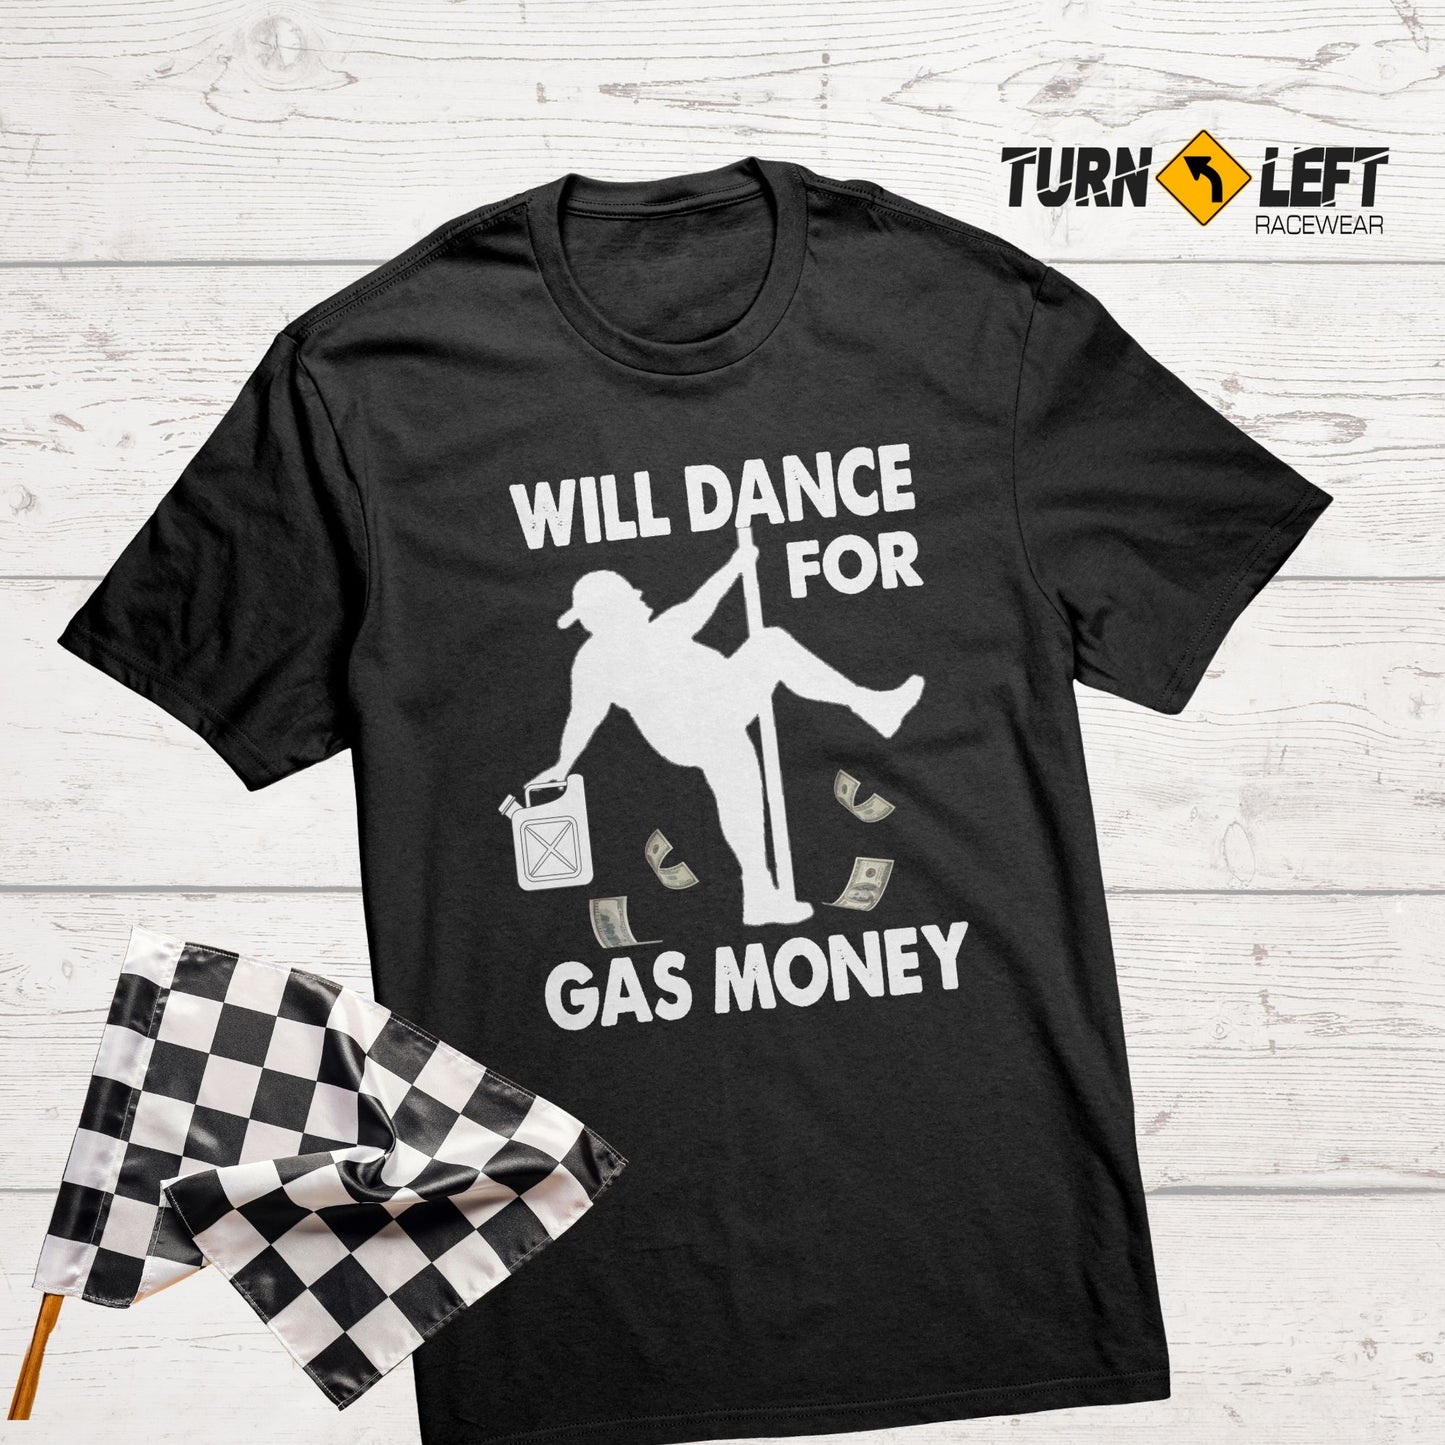 Will Dance For Gas Money T-Shirts Rising Gas Prices Inflation Humor Pole Dancing Fat Man T-shirts